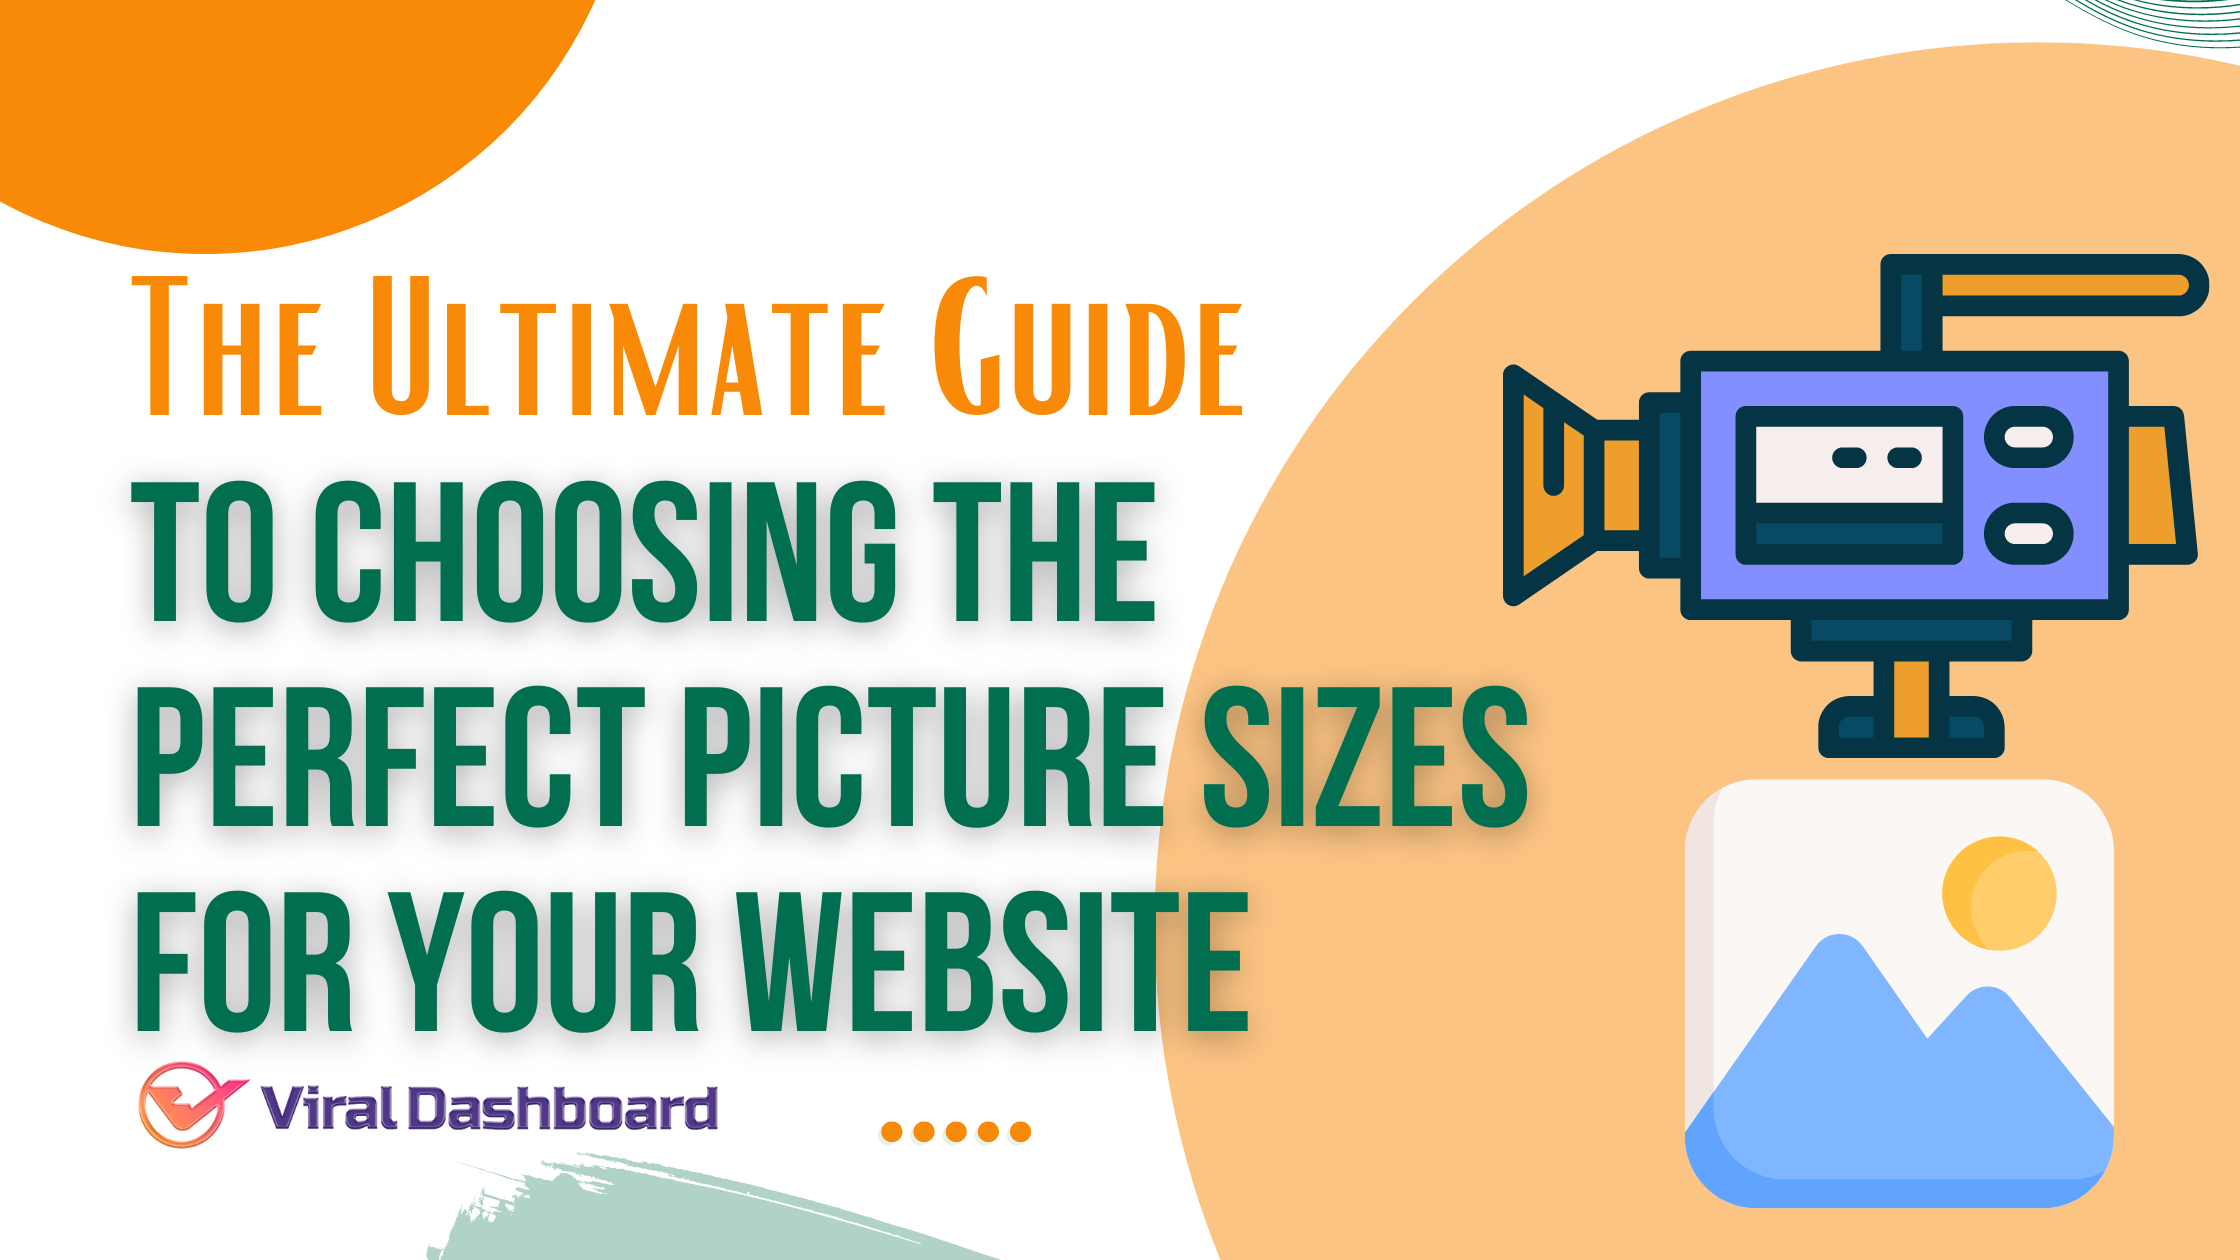 The Ultimate Guide to Choosing the Perfect Picture Sizes for Your Website